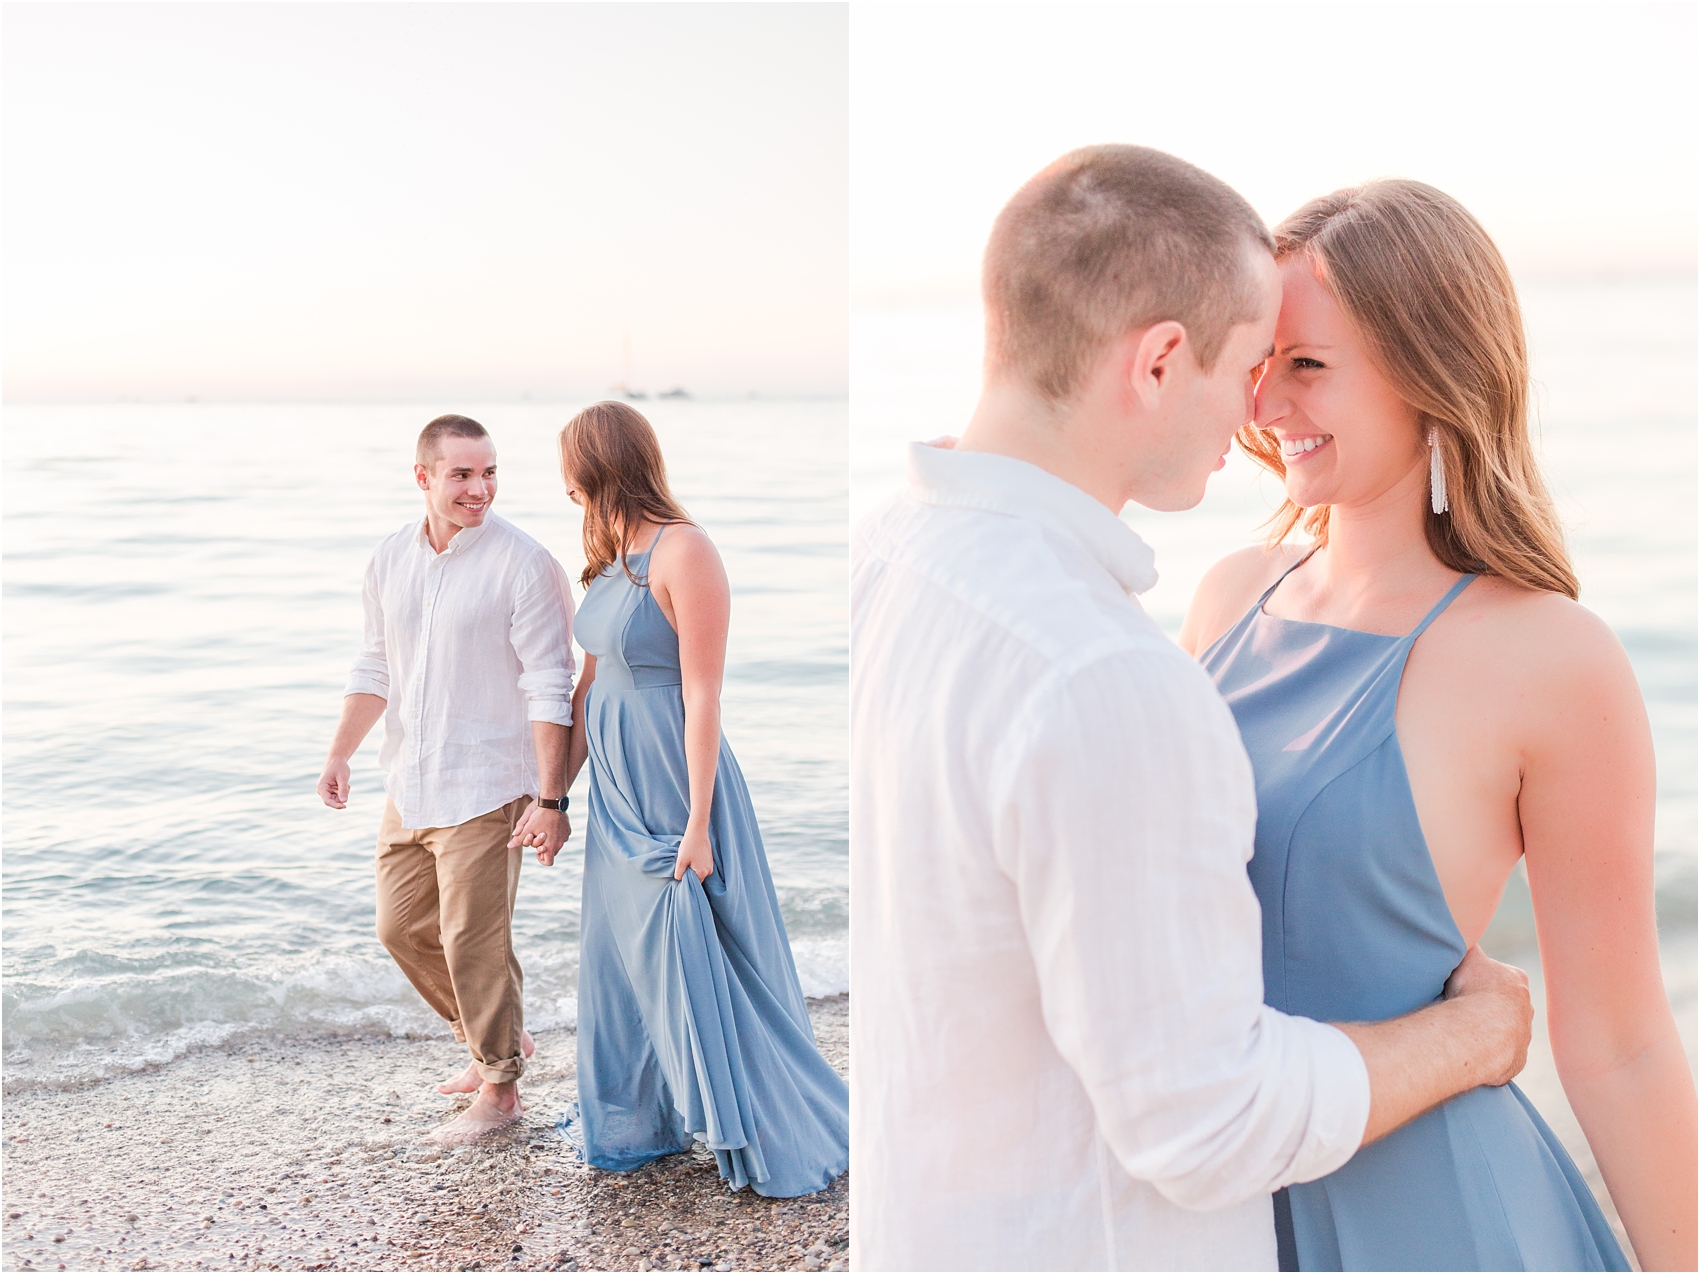 romantic-sunset-engagement-photos-at-michigan-beach-park-in-charlevoix-mi-by-courtney-carolyn-photography_0009.jpg